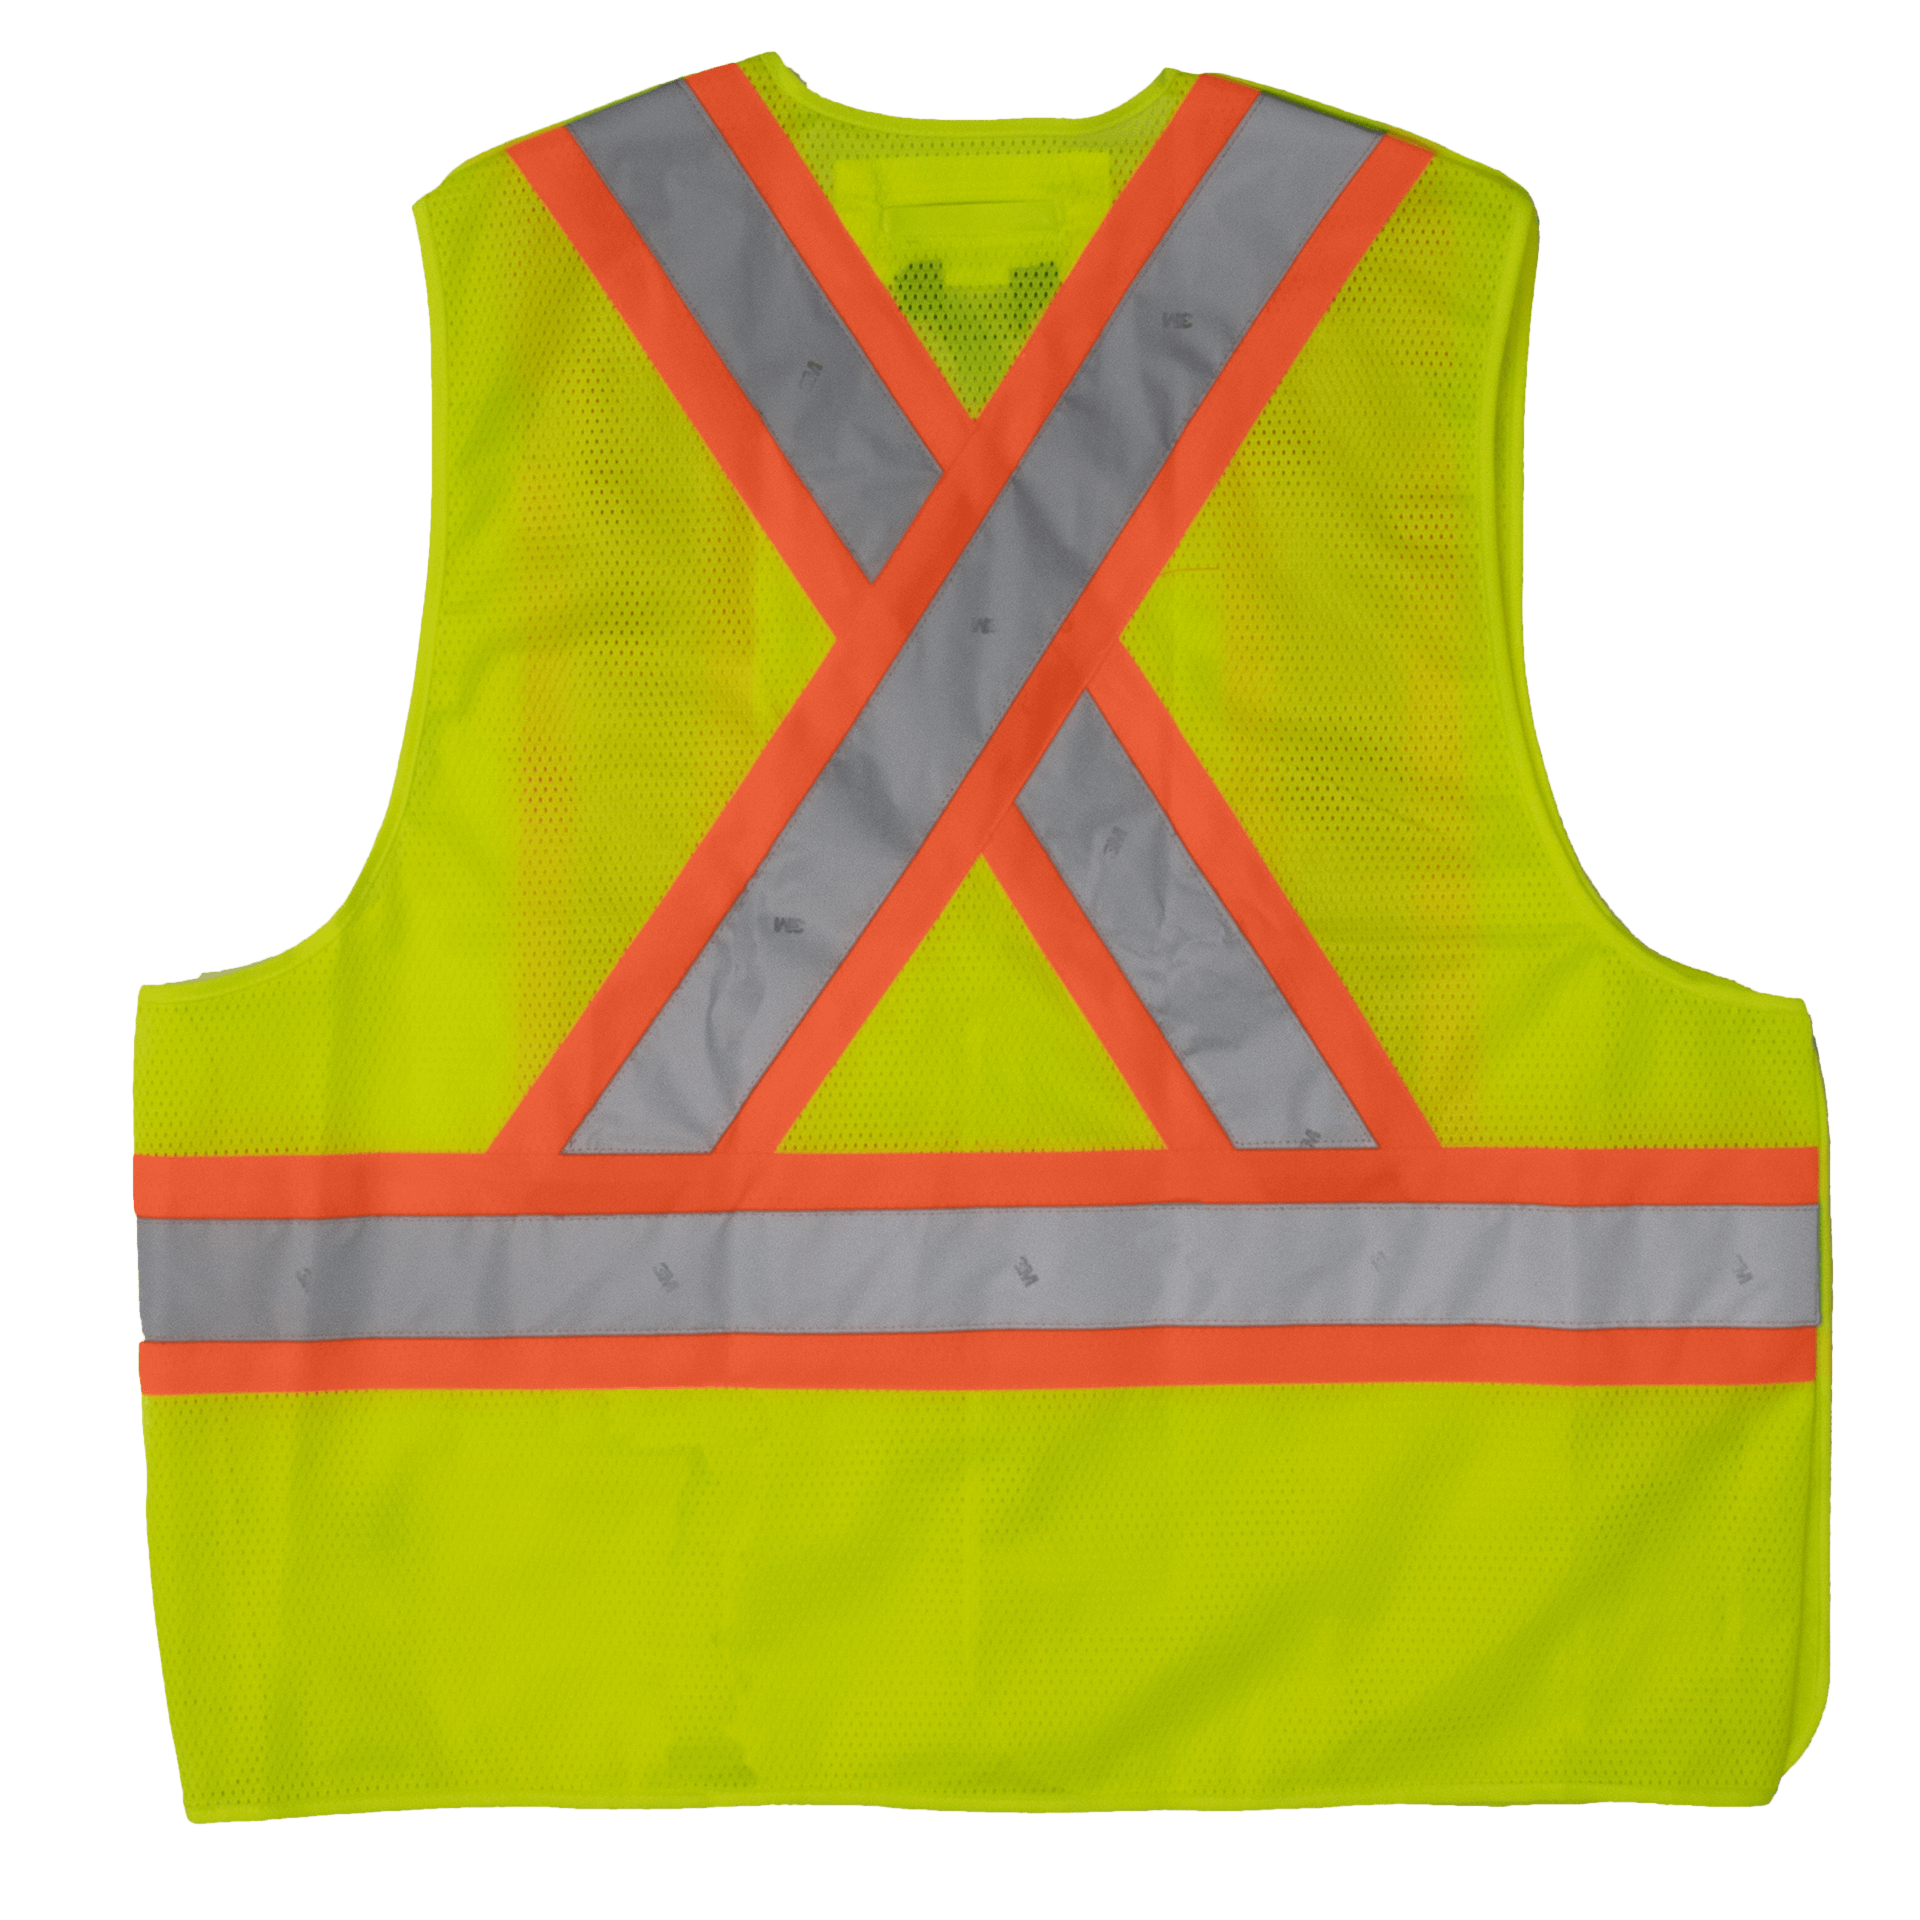 Tough Duck 5-Point Tearaway Safety Vest - S9i0 - Fluorescent Green - back